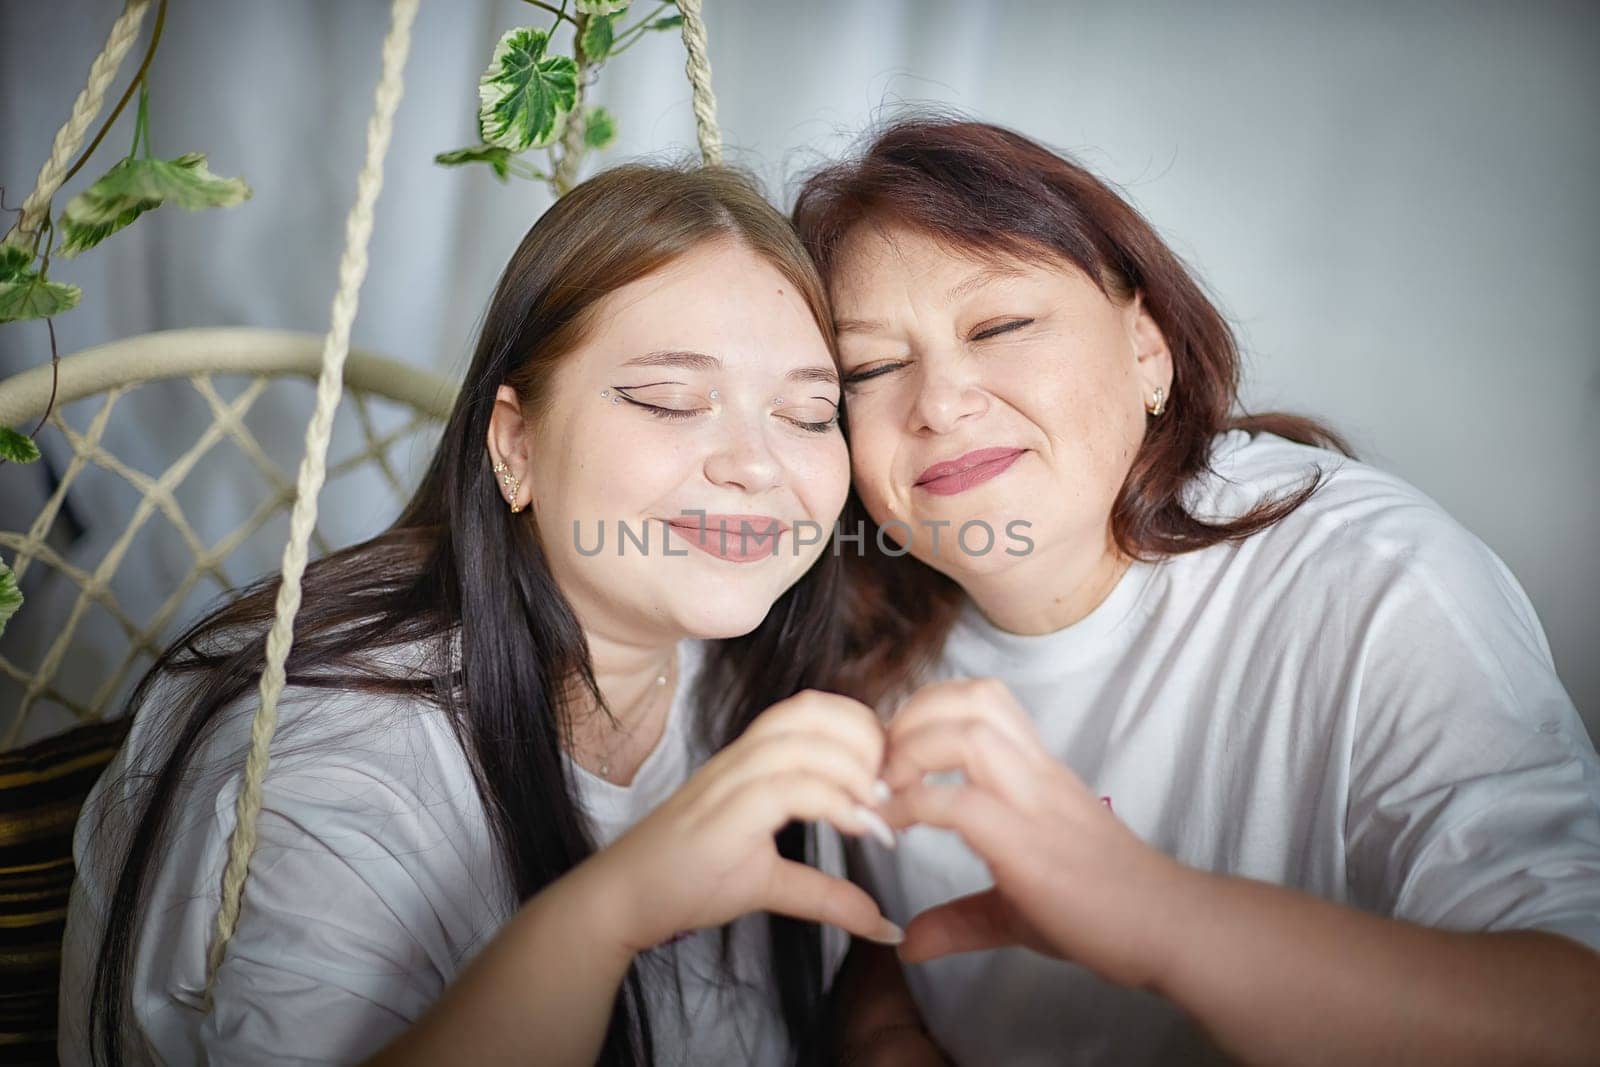 Happy Overweight family with mother and daughter in room. Middle aged woman and teenager girl having fun, joy and hugging